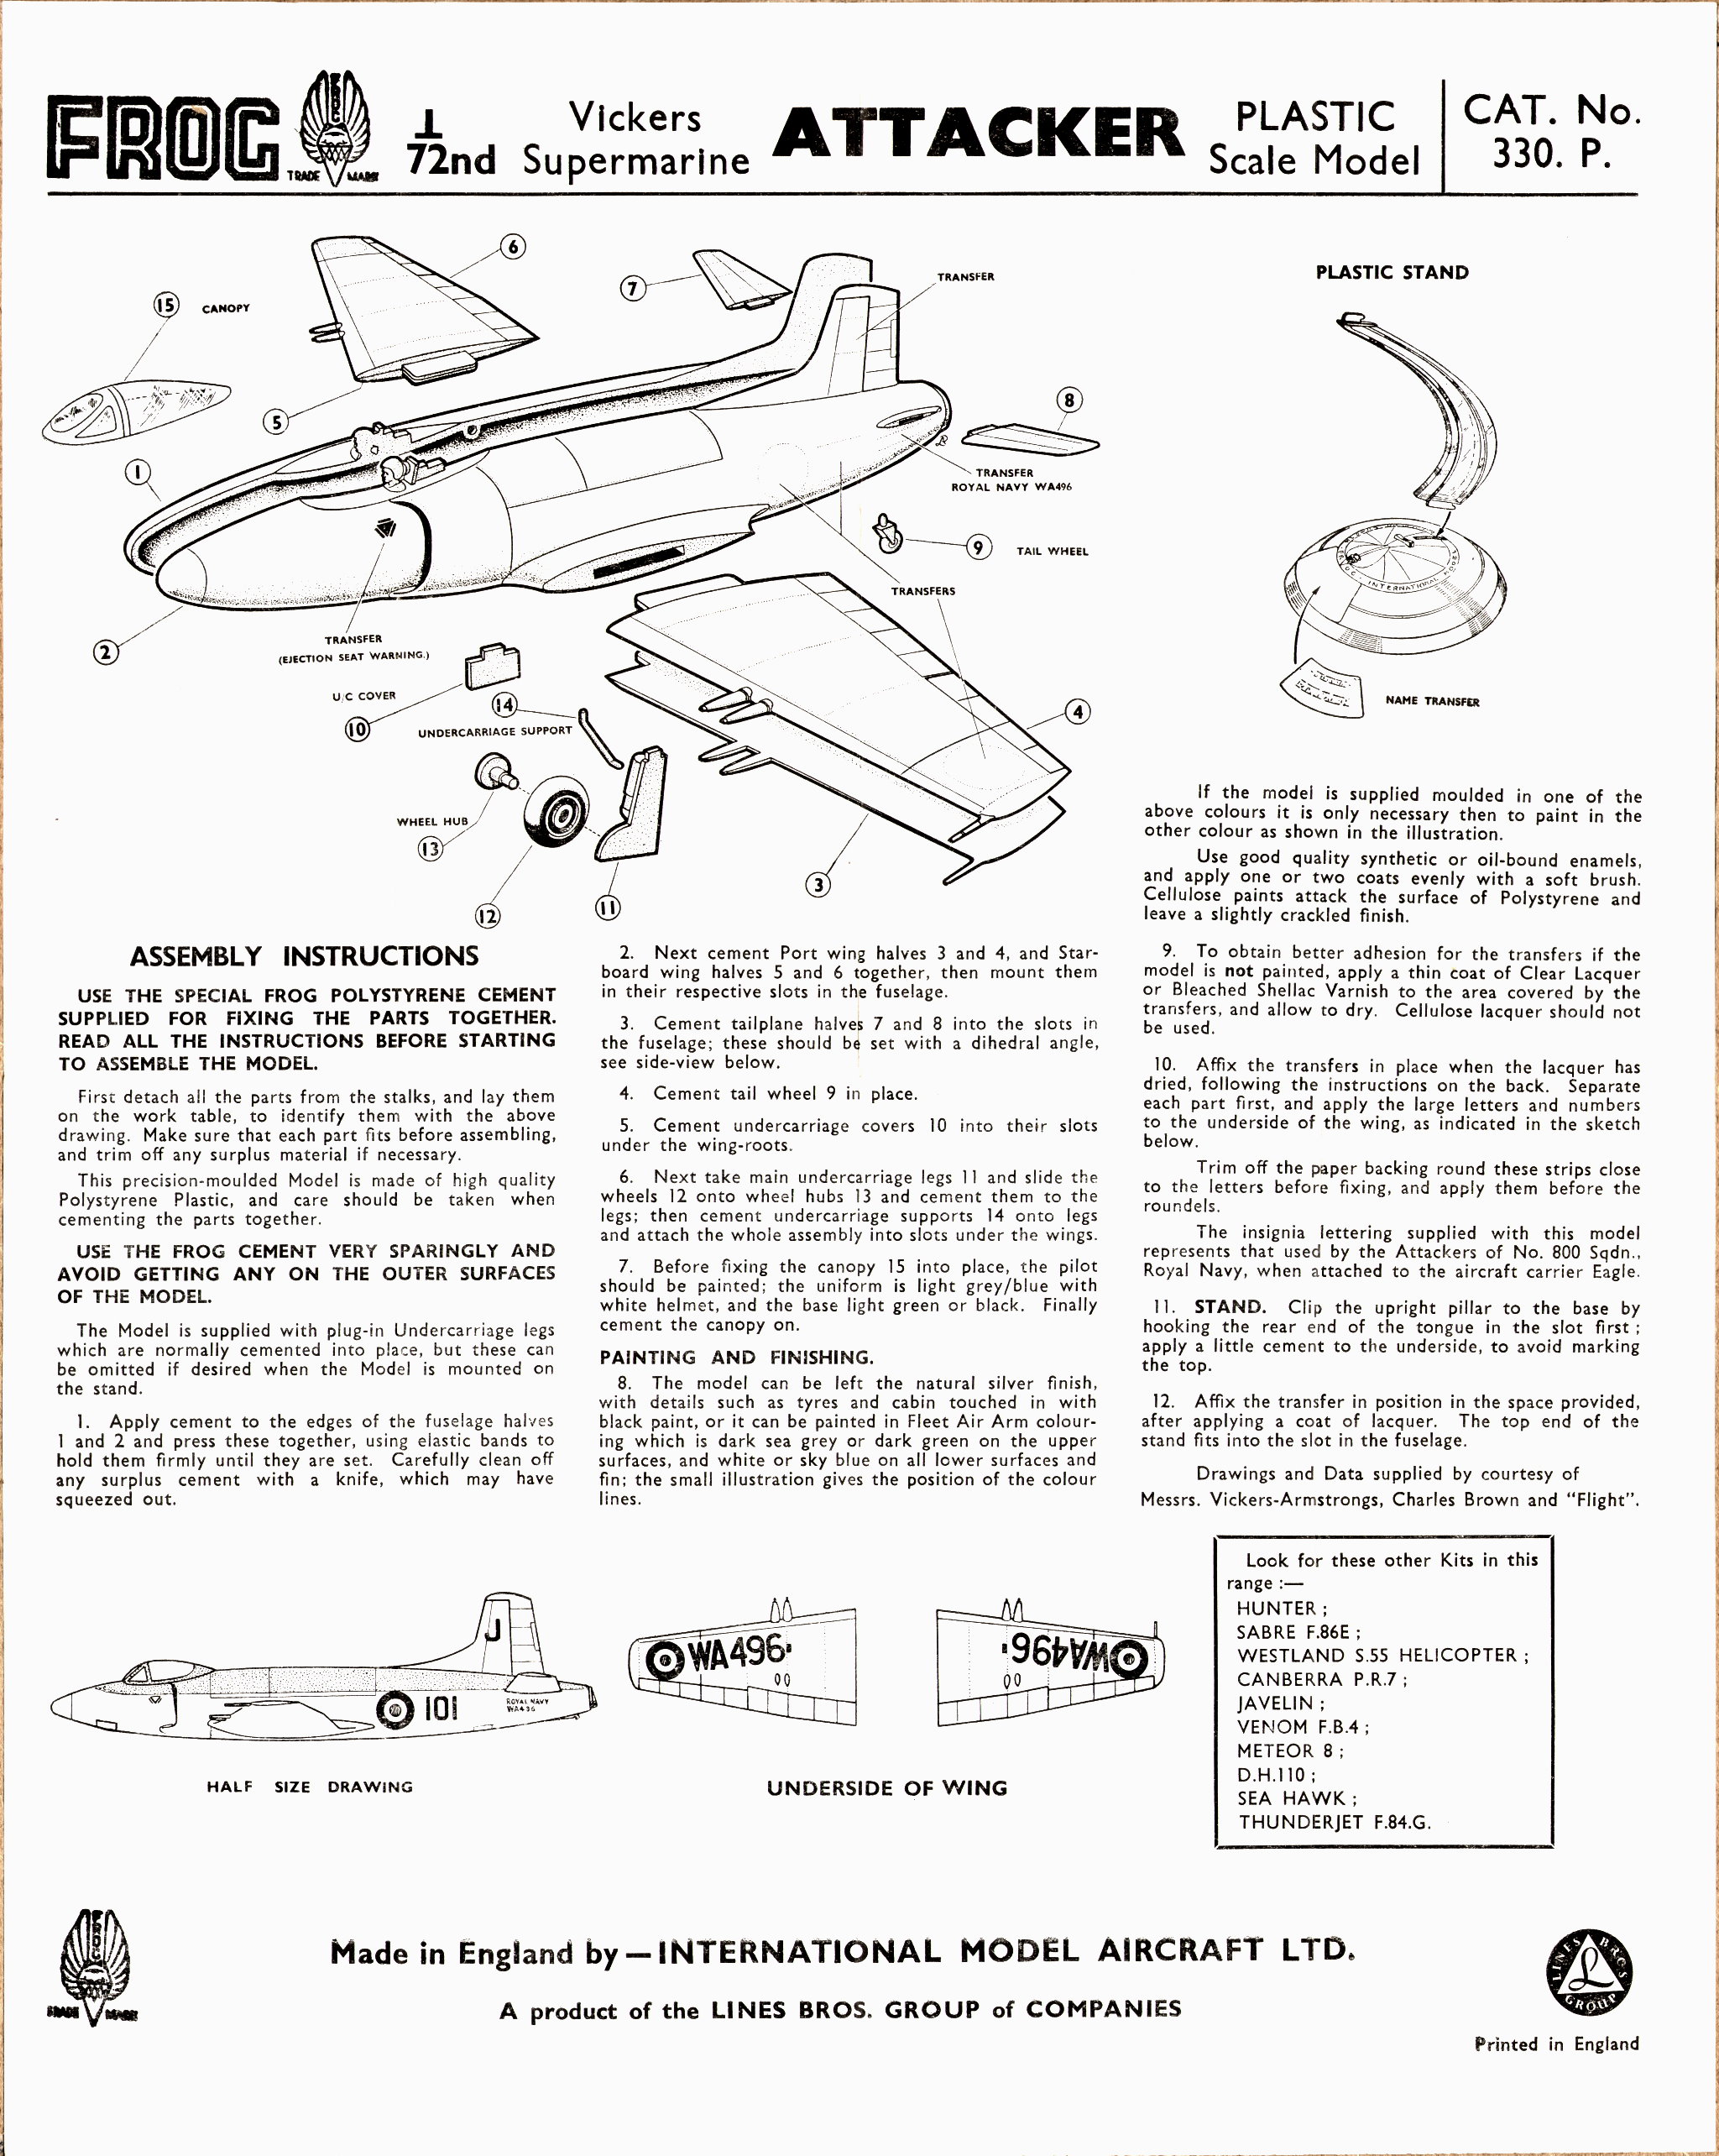 FROG 330P Vickers-Supermarine Attacker Naval Jet Fighter, ima ltd, Lines Bros. Group, 1957, assembly instruction